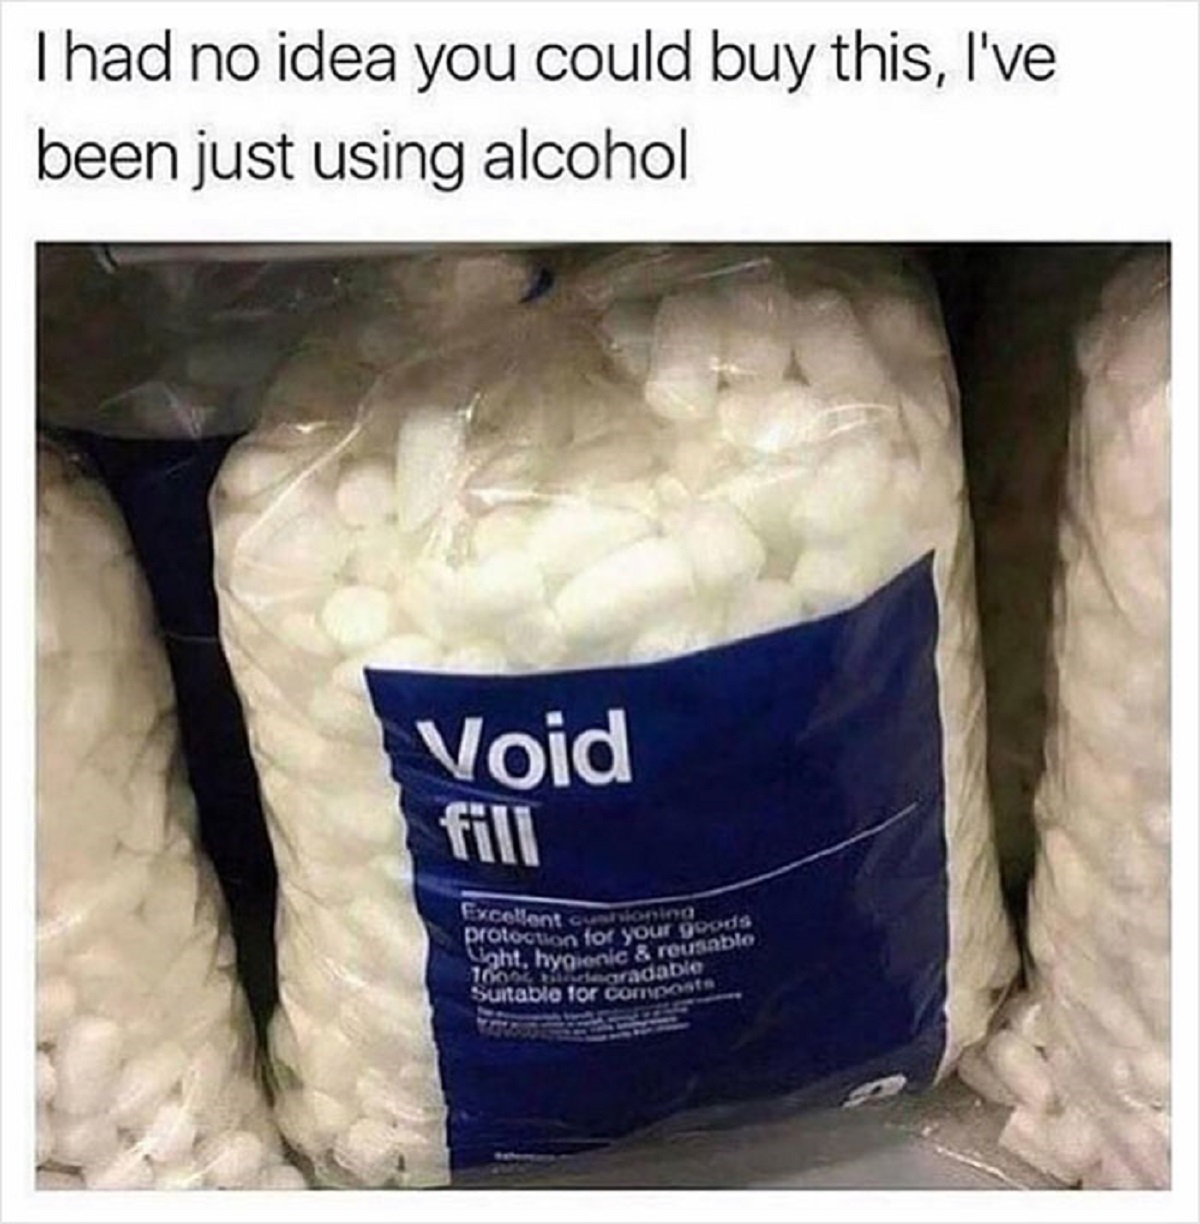 into the void meme - I had no idea you could buy this, I've been just using alcohol Void fill Excellent cushioning protection for your goods Light, hygienic & reusable 1000 degradable Suitable for composts